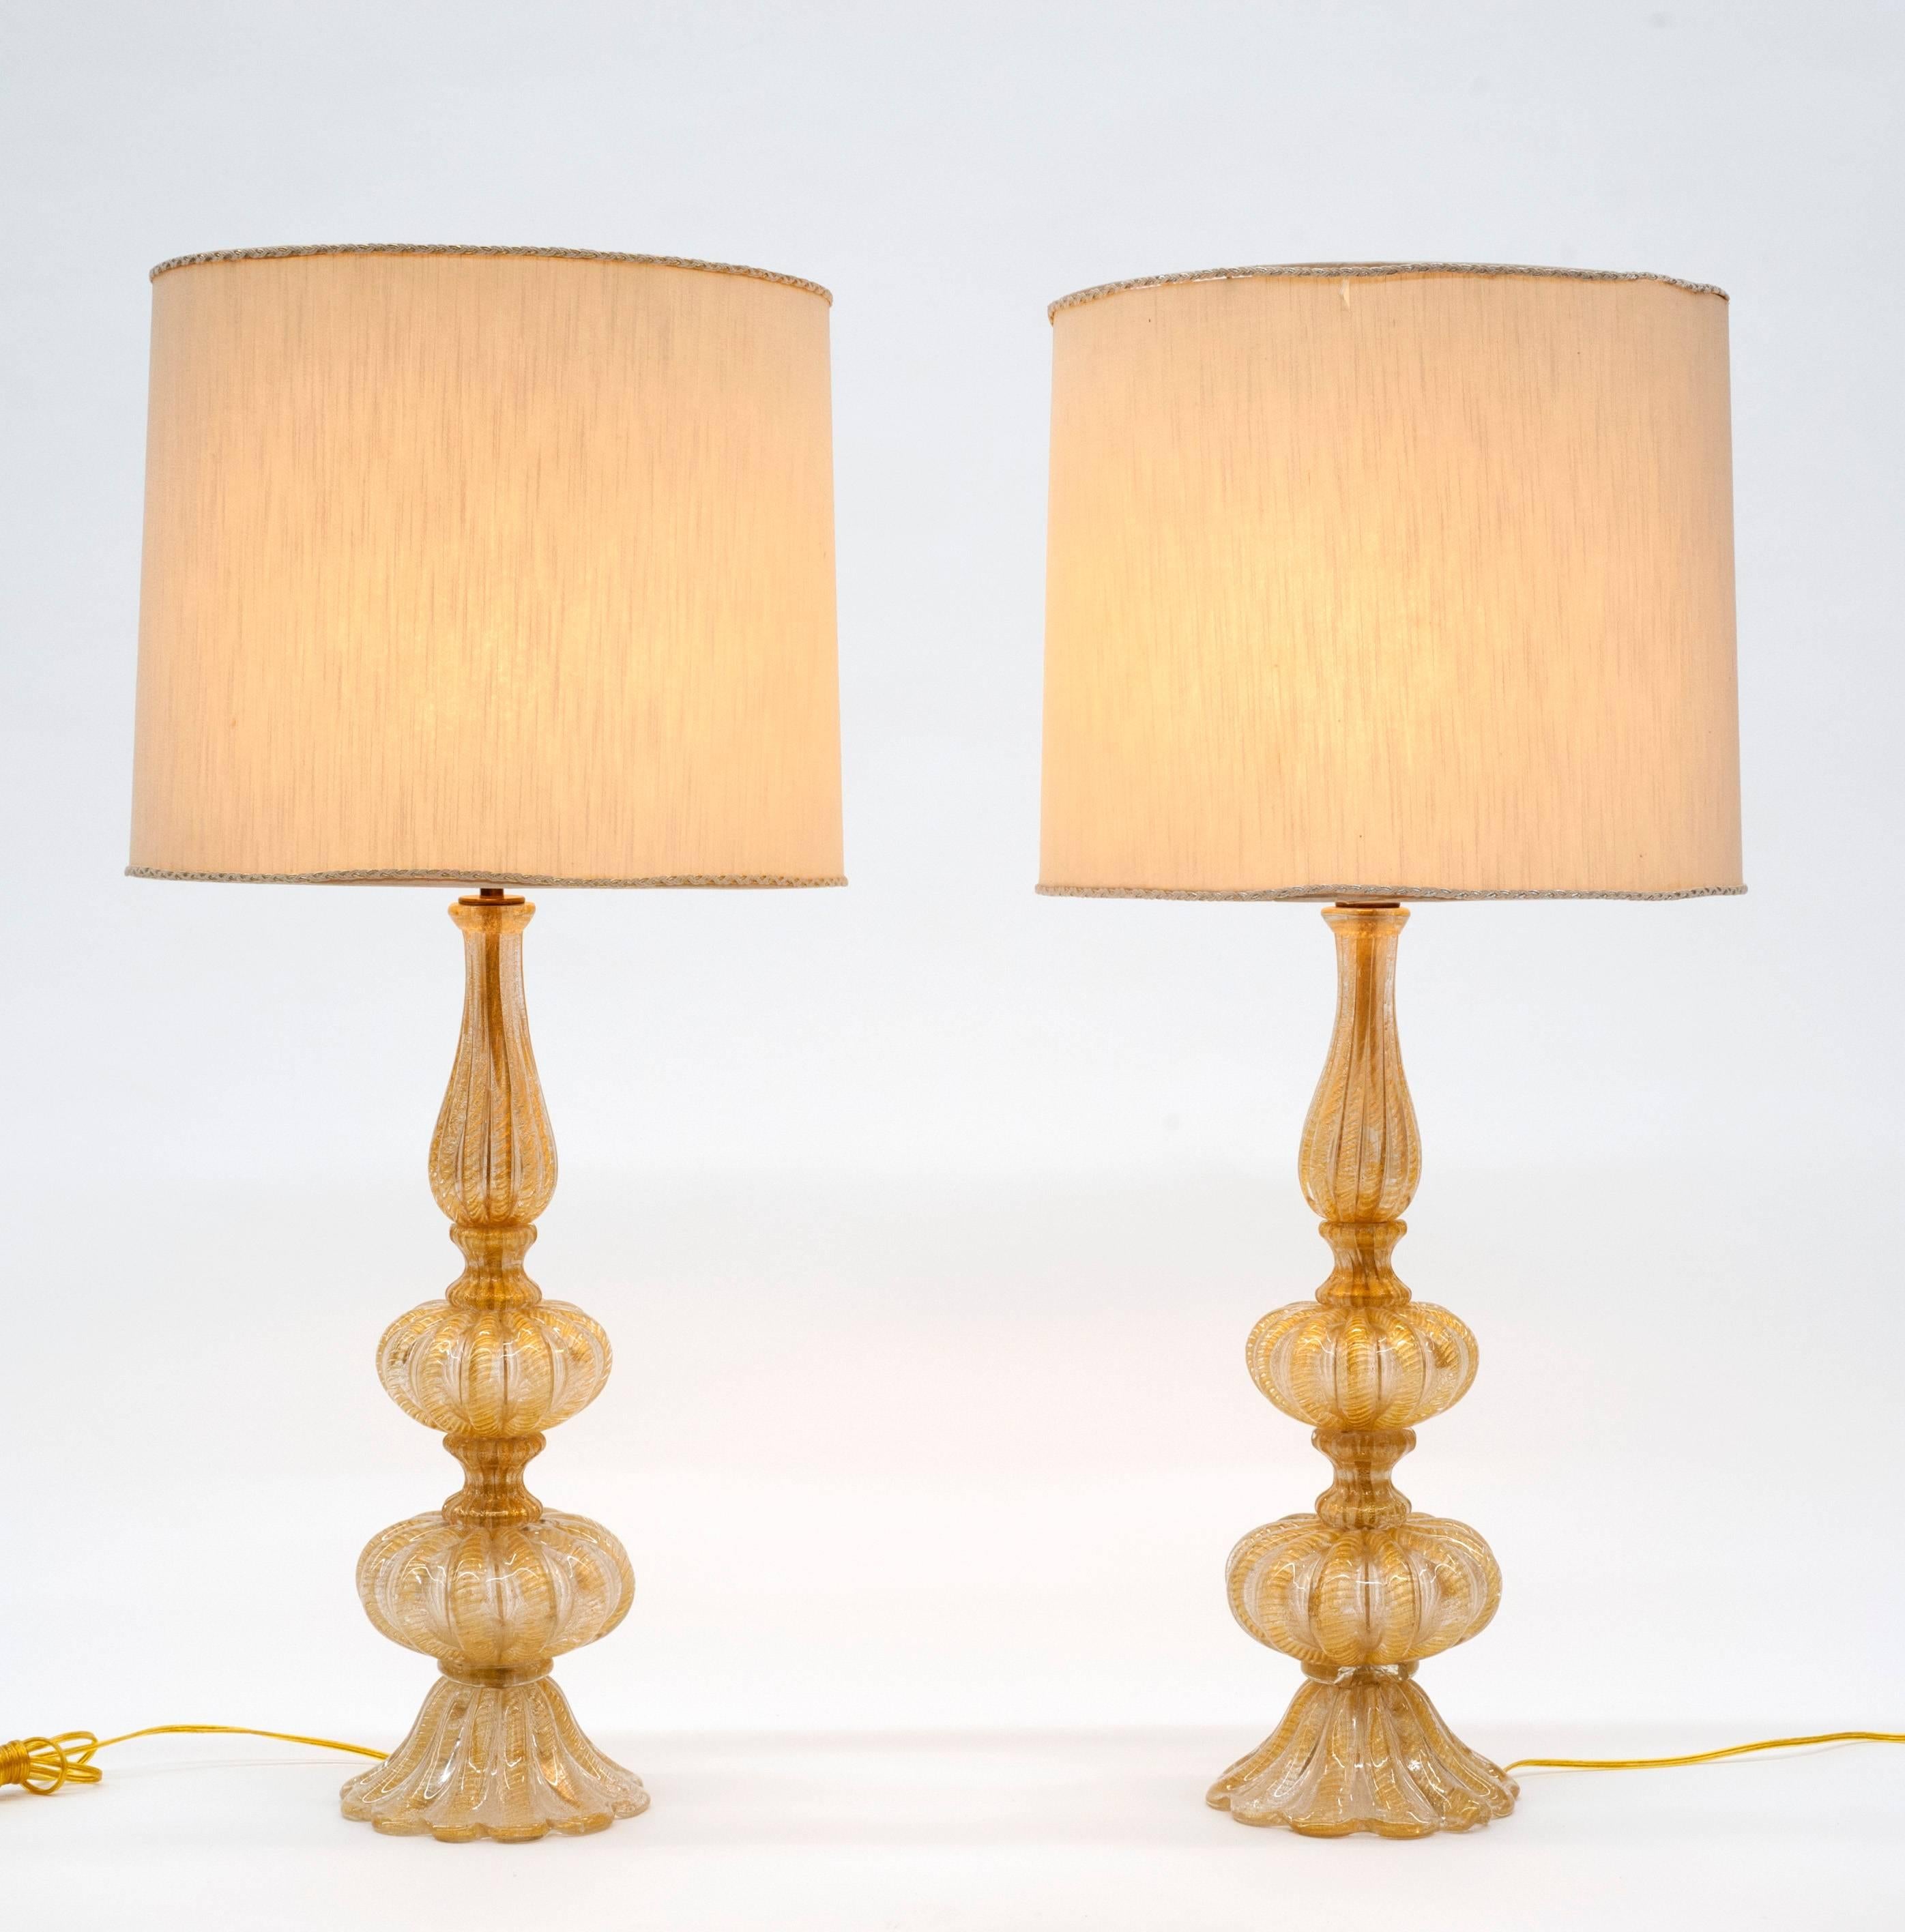 Fantastic pair of vintage glass lamps by Barovier & Toso. Lamps are heavy and exceptionally made. Rewired and ready to be enjoyed. One lamp has small bottom detail missing (please see last photo). 